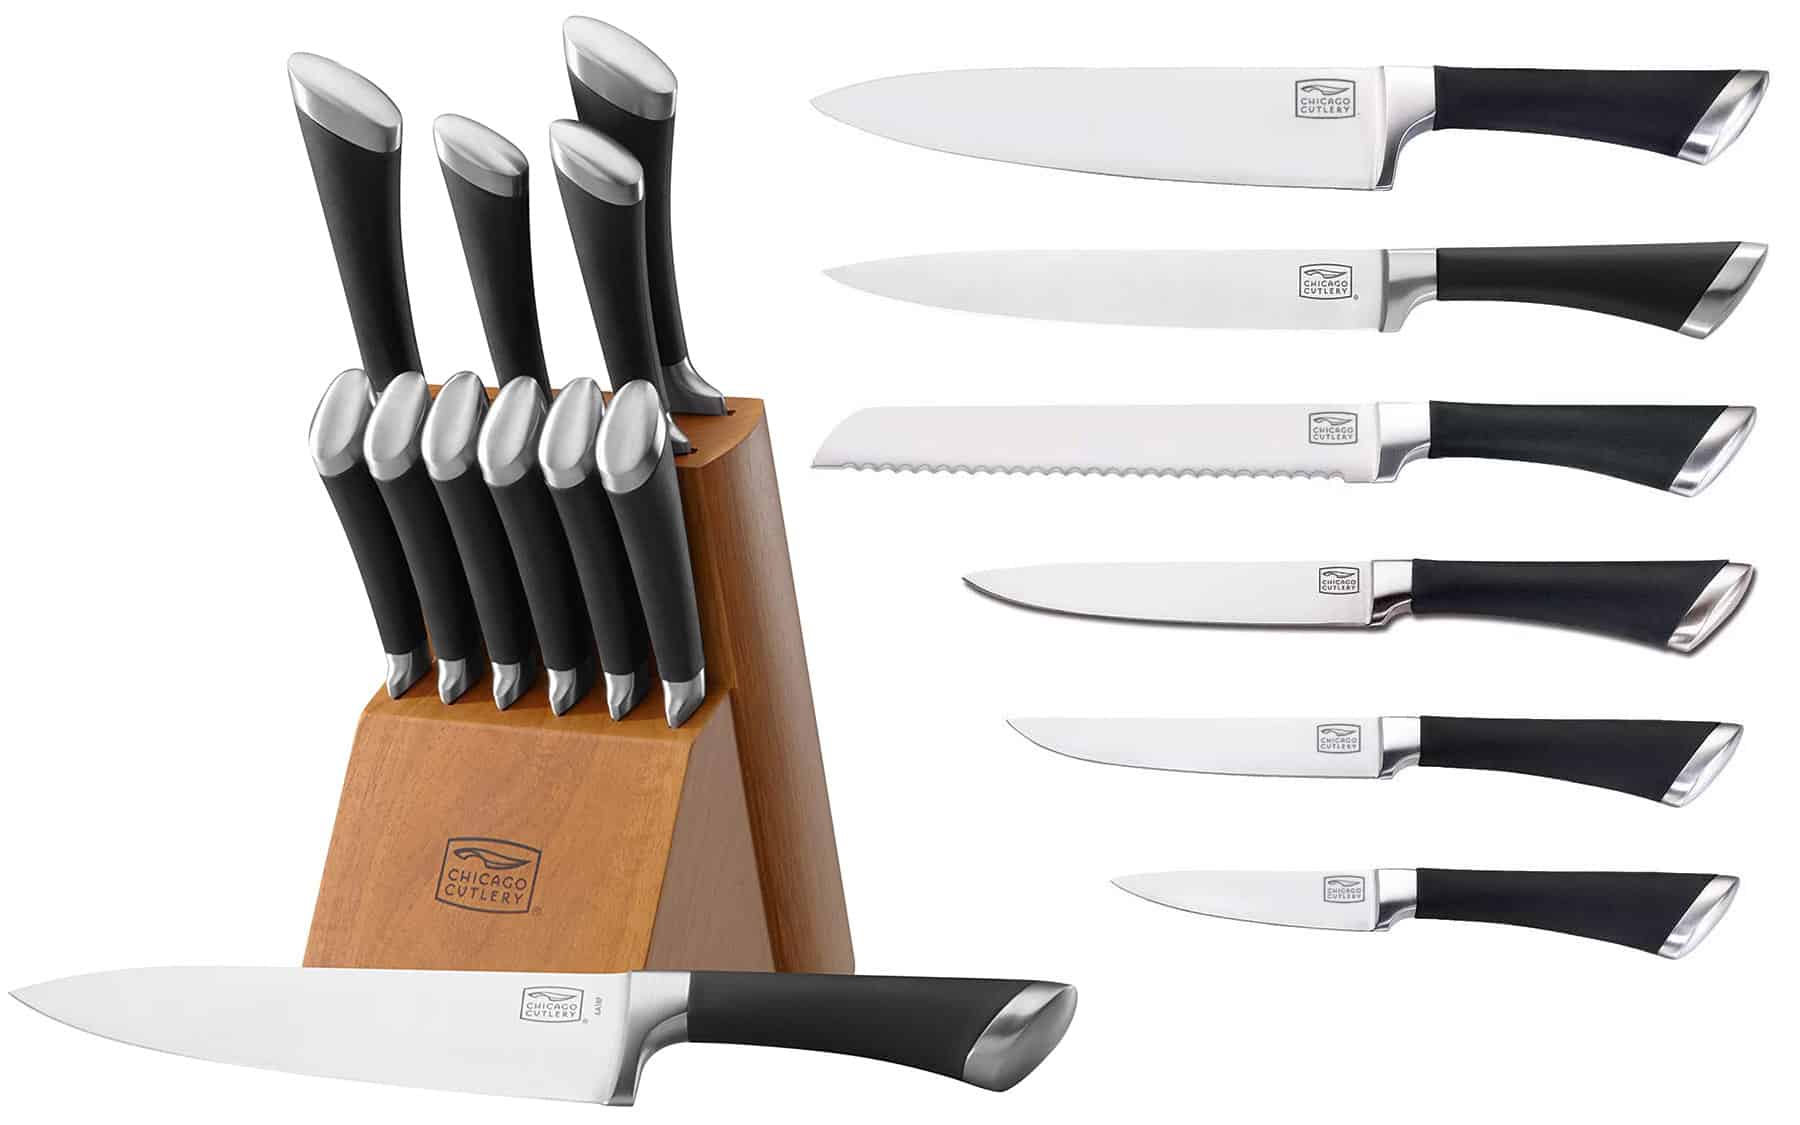 Where to Buy an Affordable Pastel Knife Set